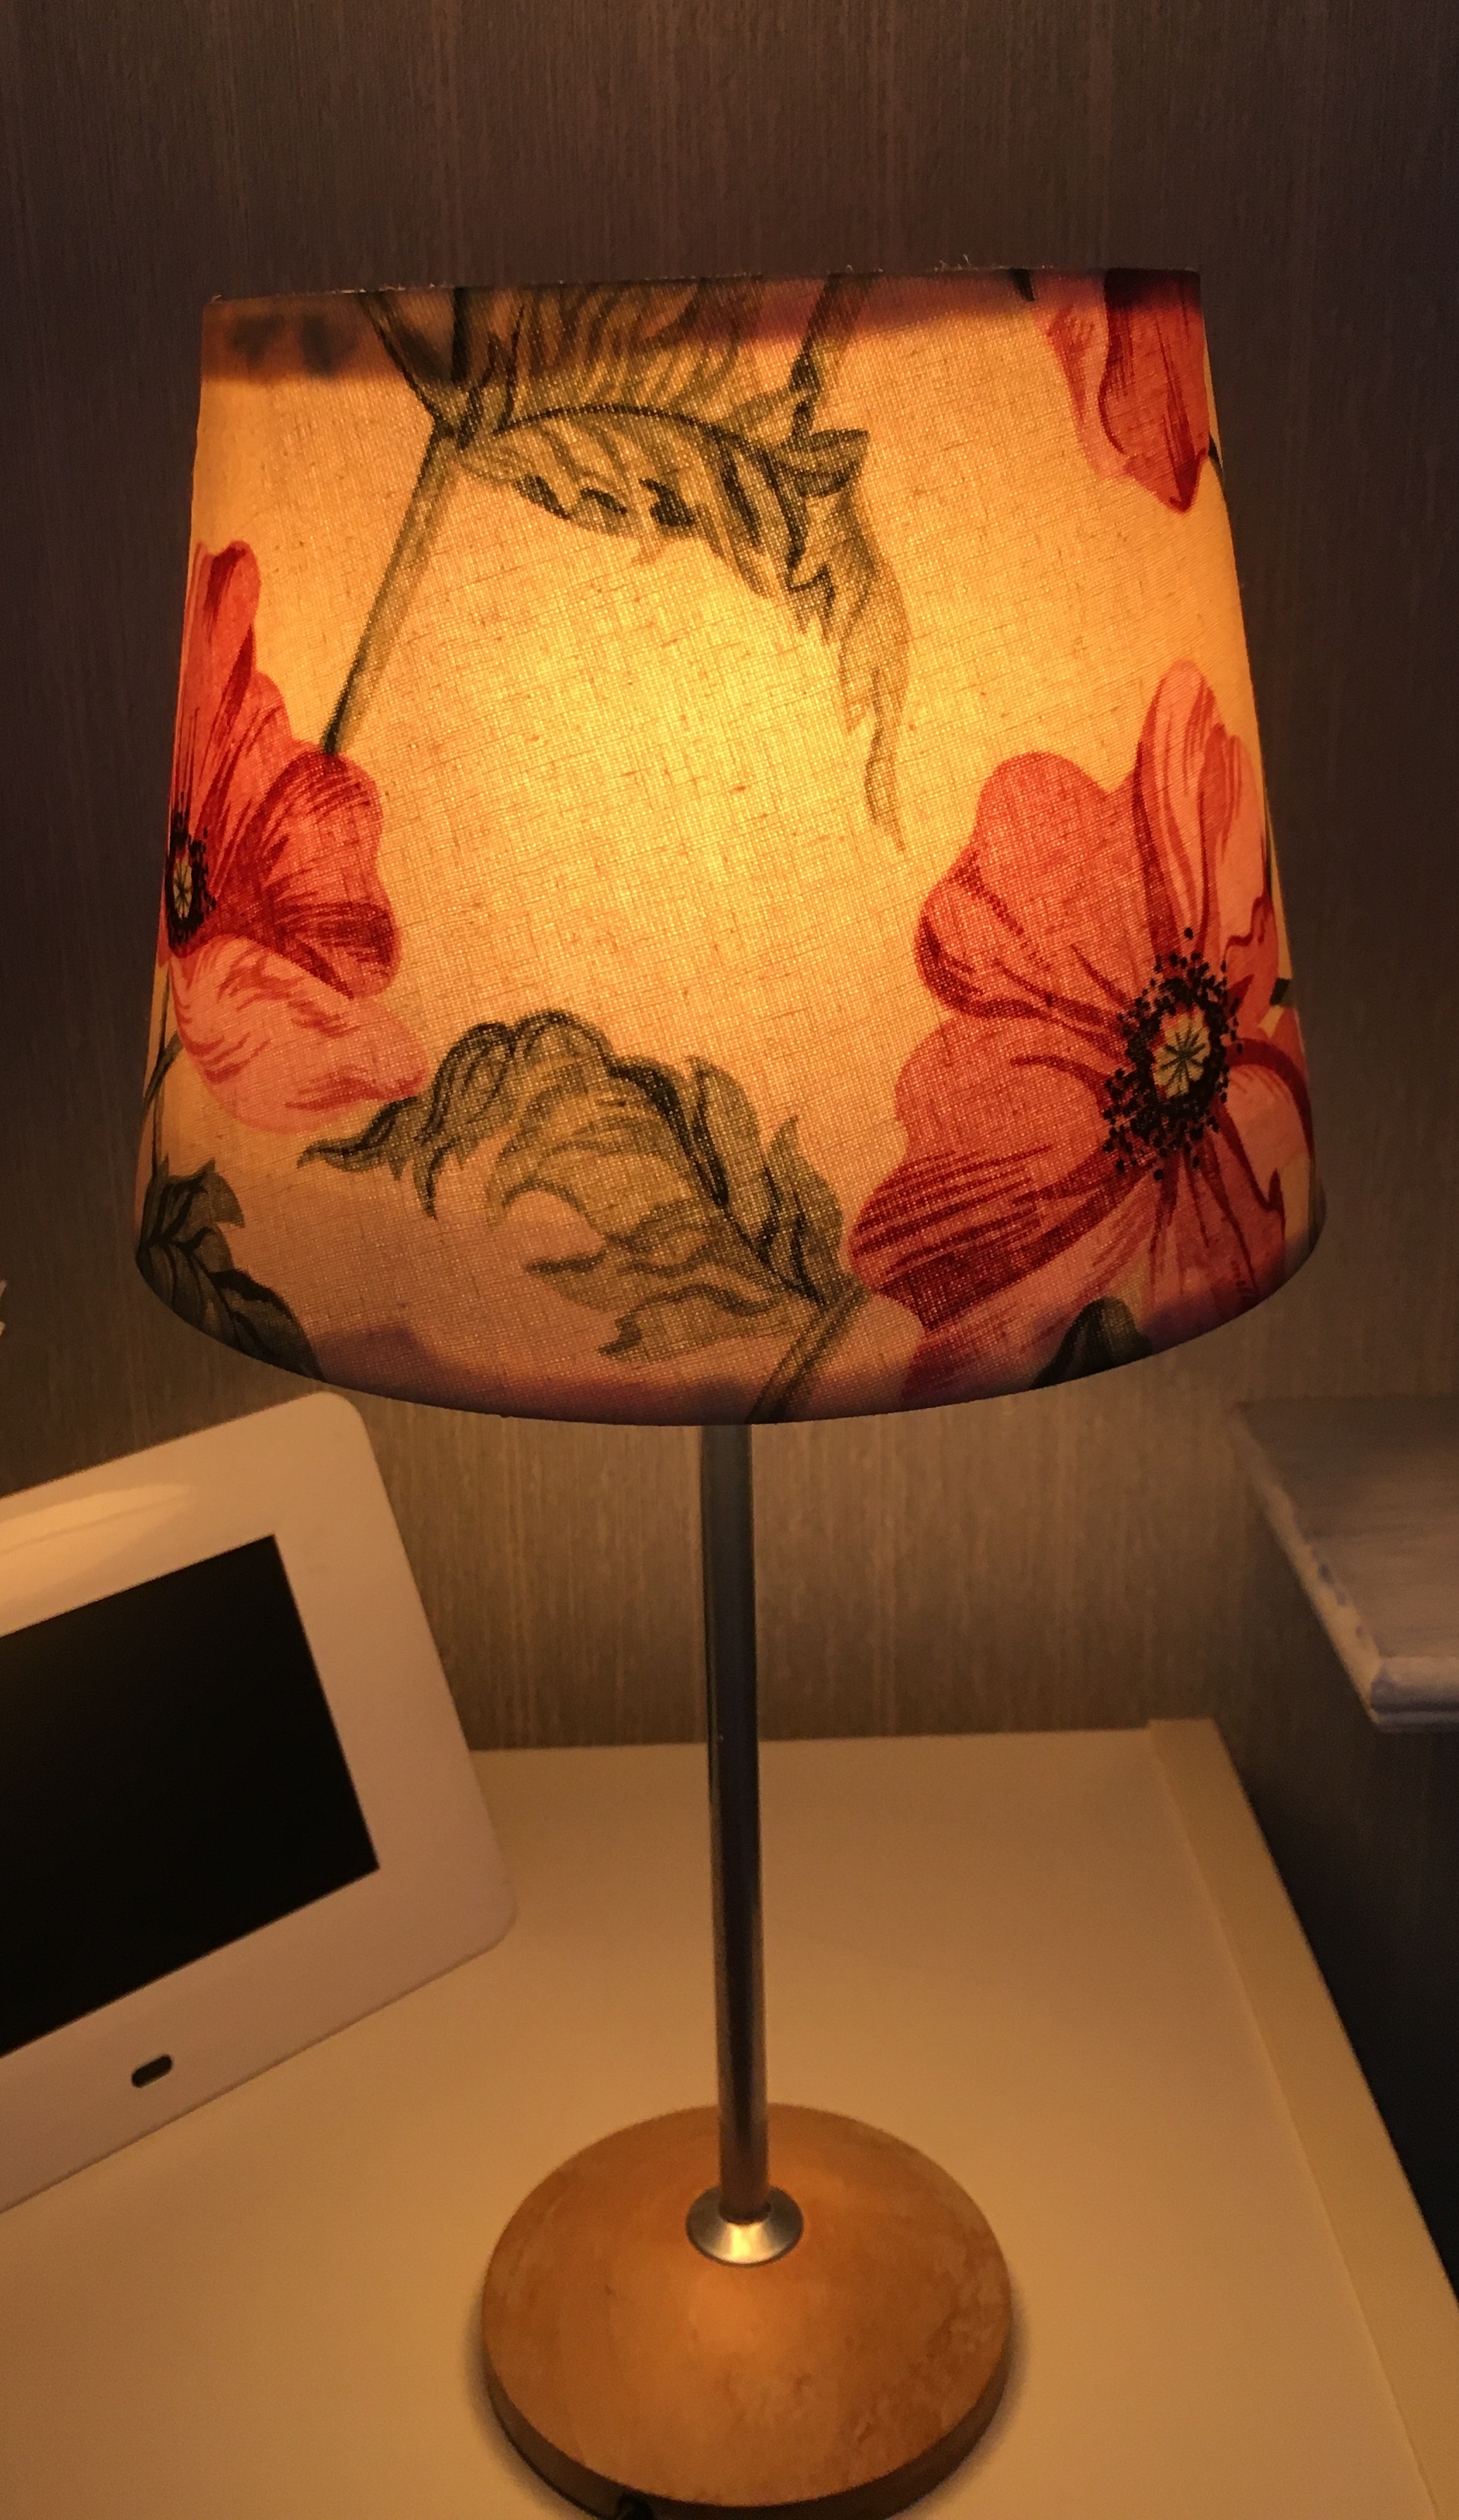 Lamp shade for the DIY.